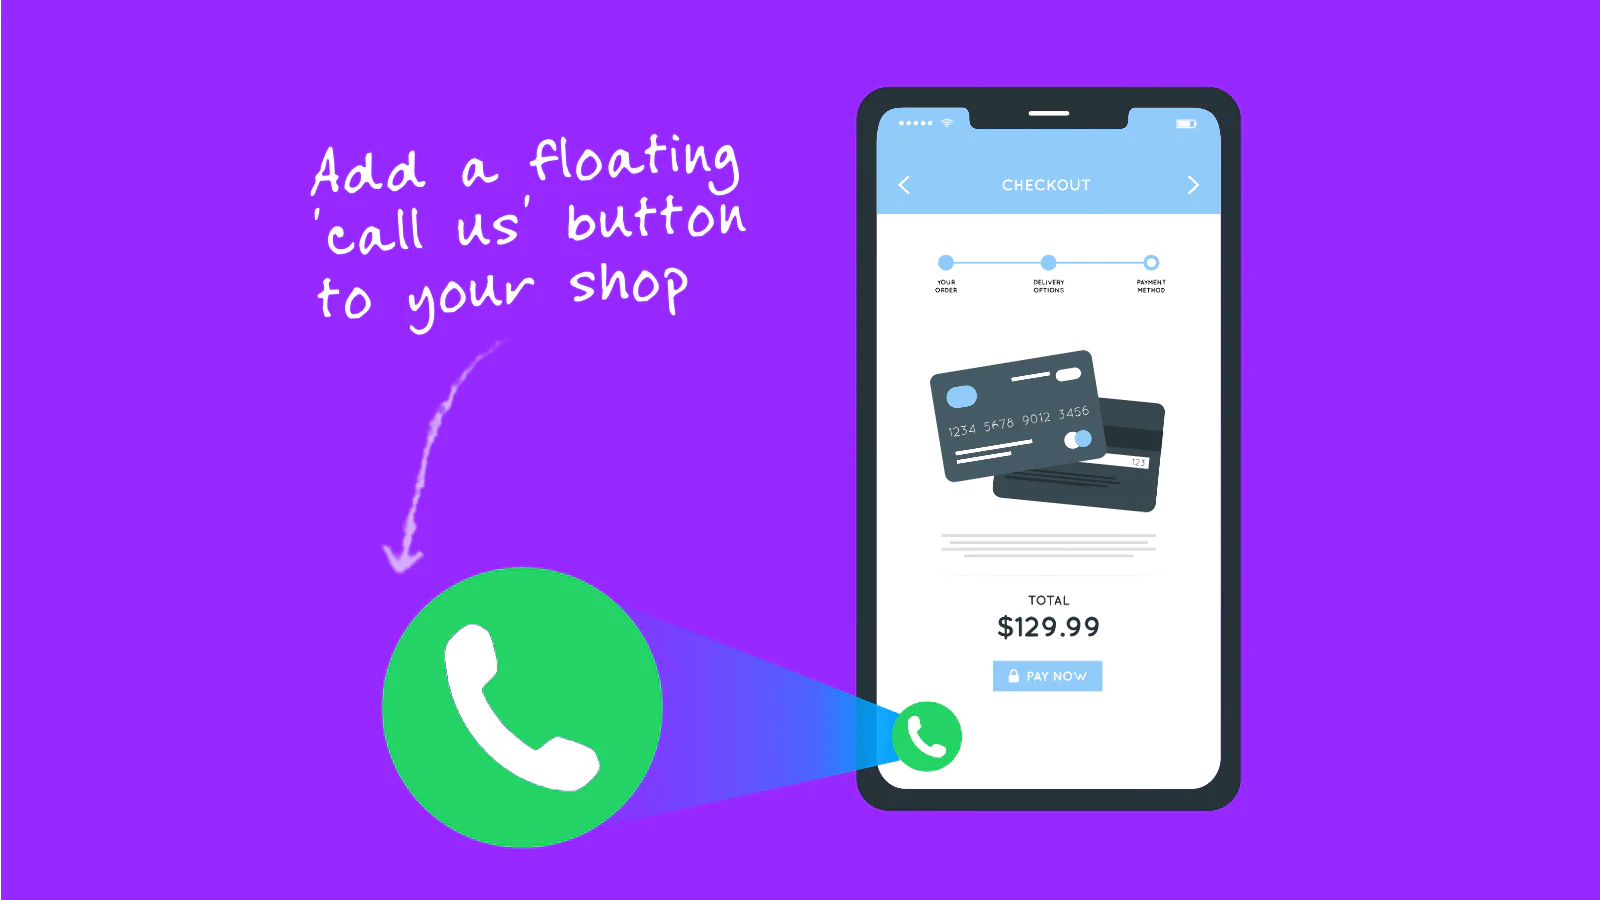 phoneize-phone-call-button-app-floating